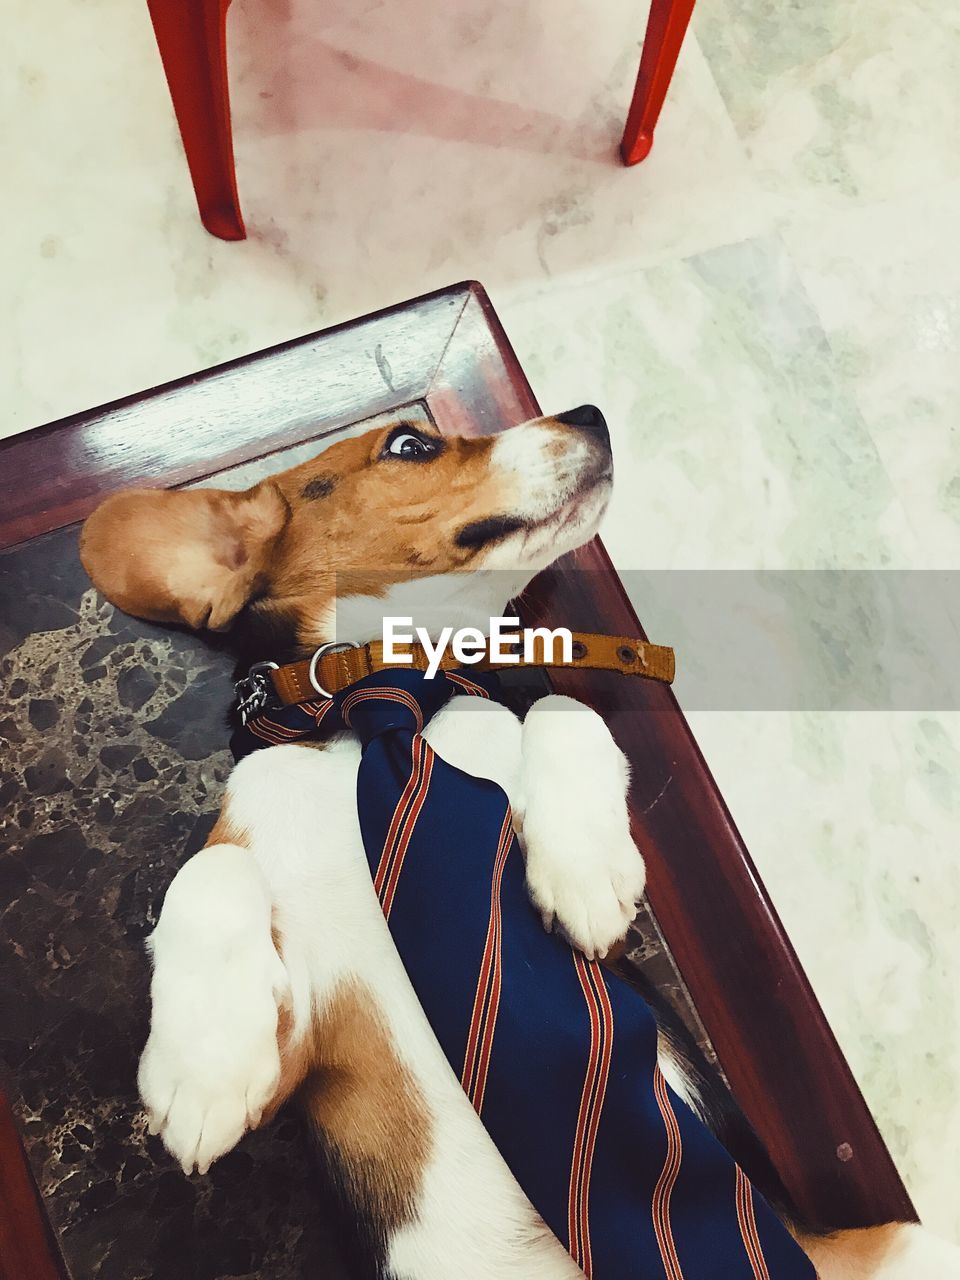 HIGH ANGLE VIEW OF DOG WITH MOUTH OPEN